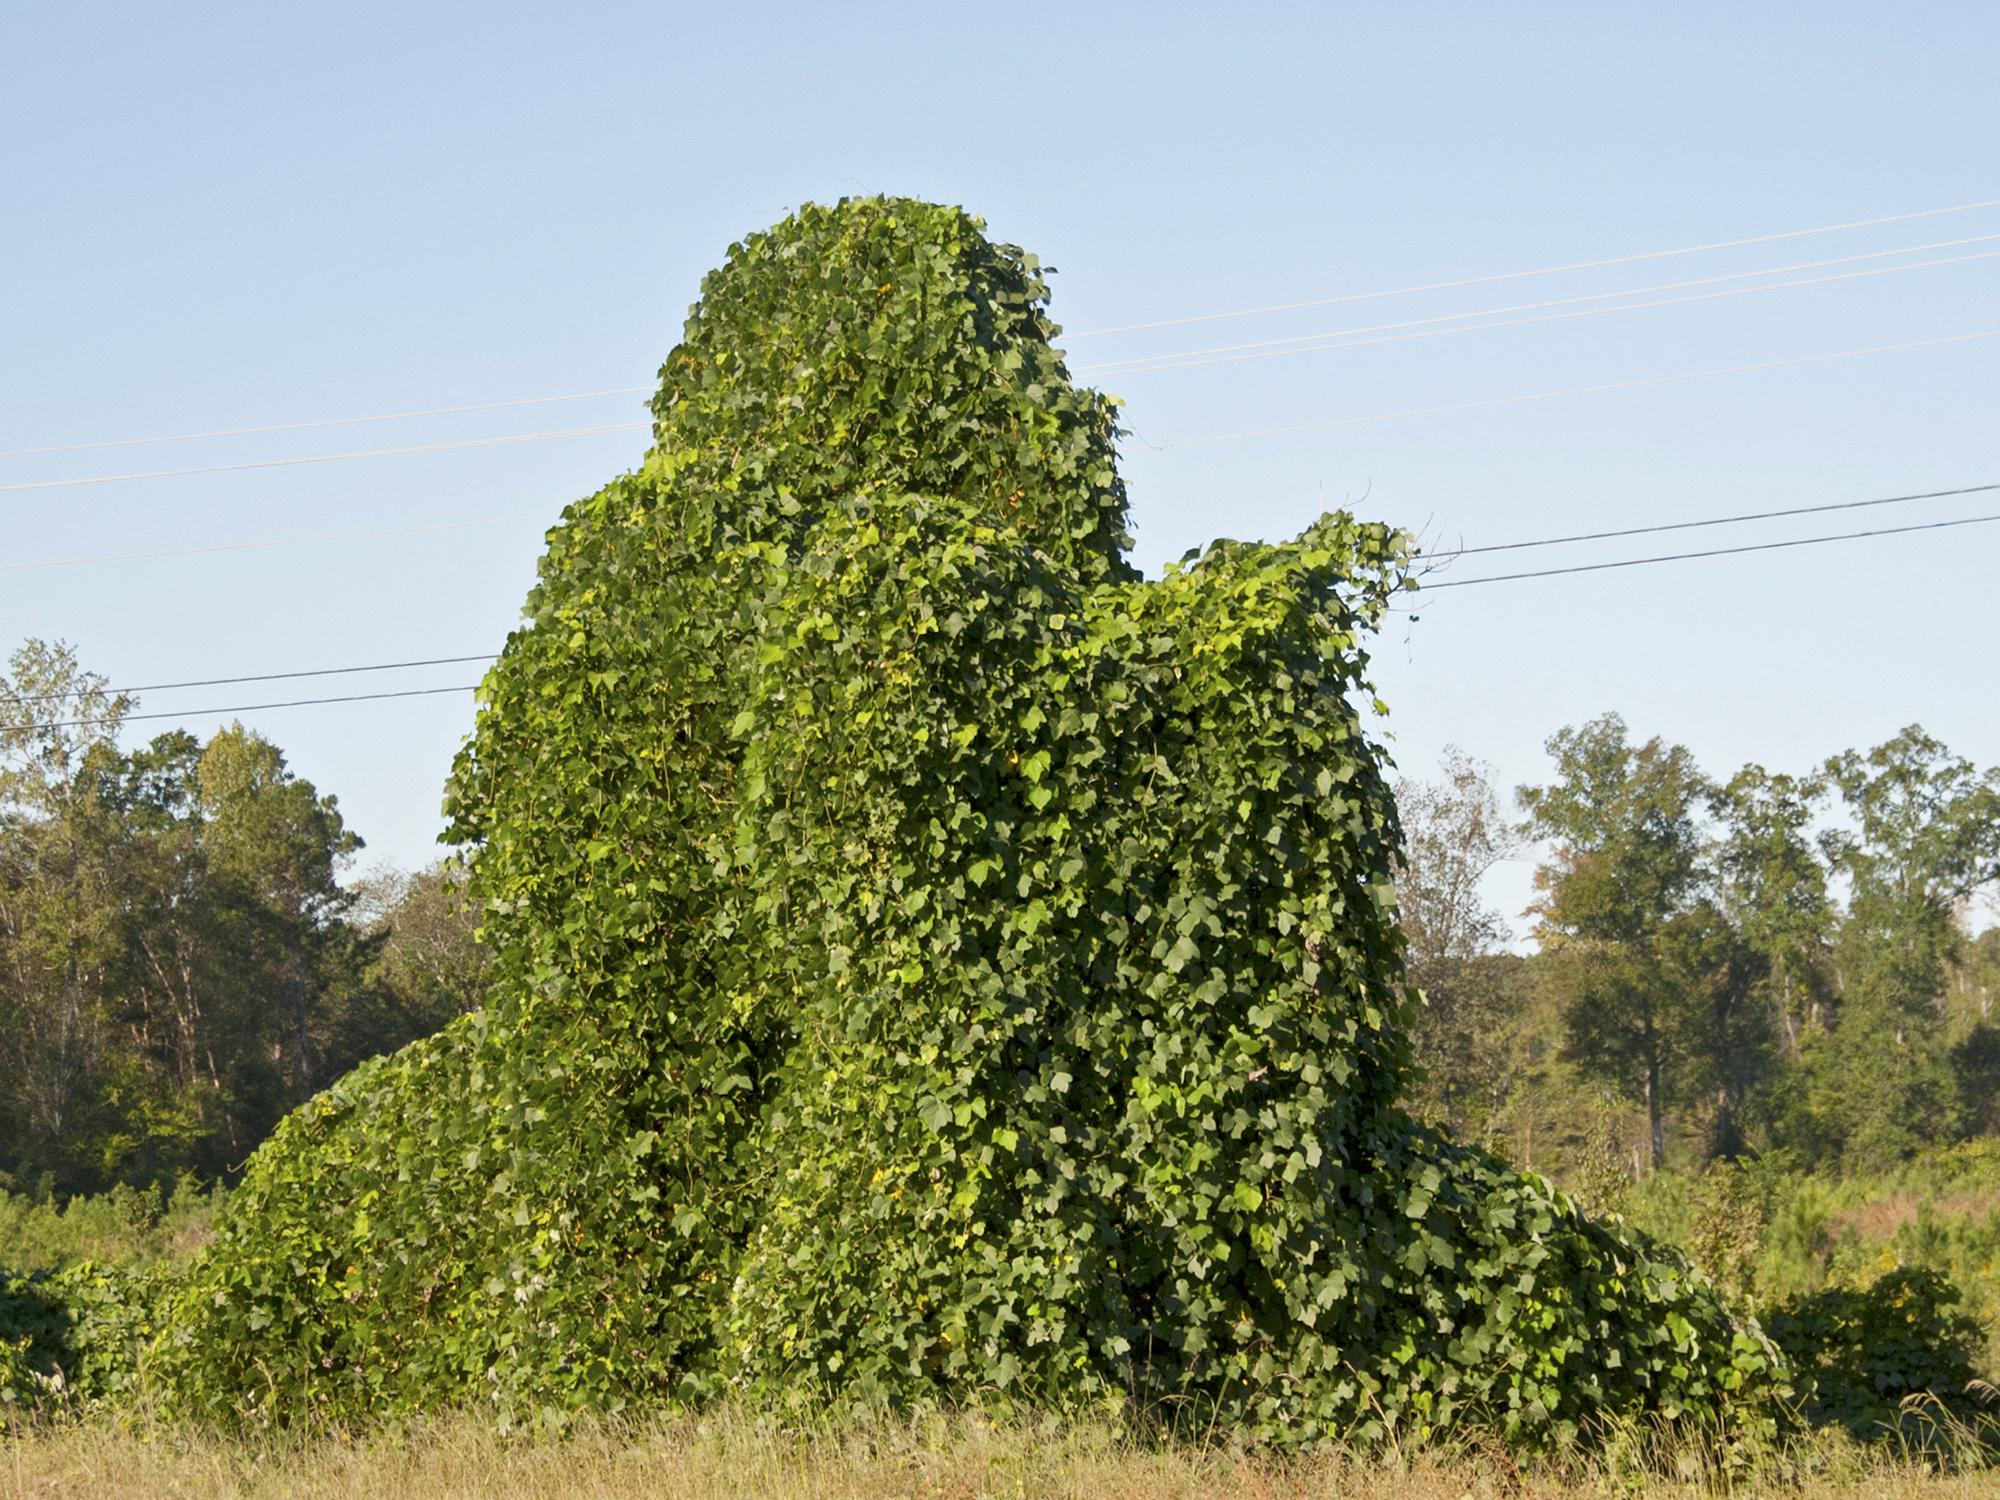 Kudzu is one of many invasive species of plants, insects, fish and mammals competing with Mississippi’s native species for resources. (File photo by MSU Ag Communications/Kat Lawrence)